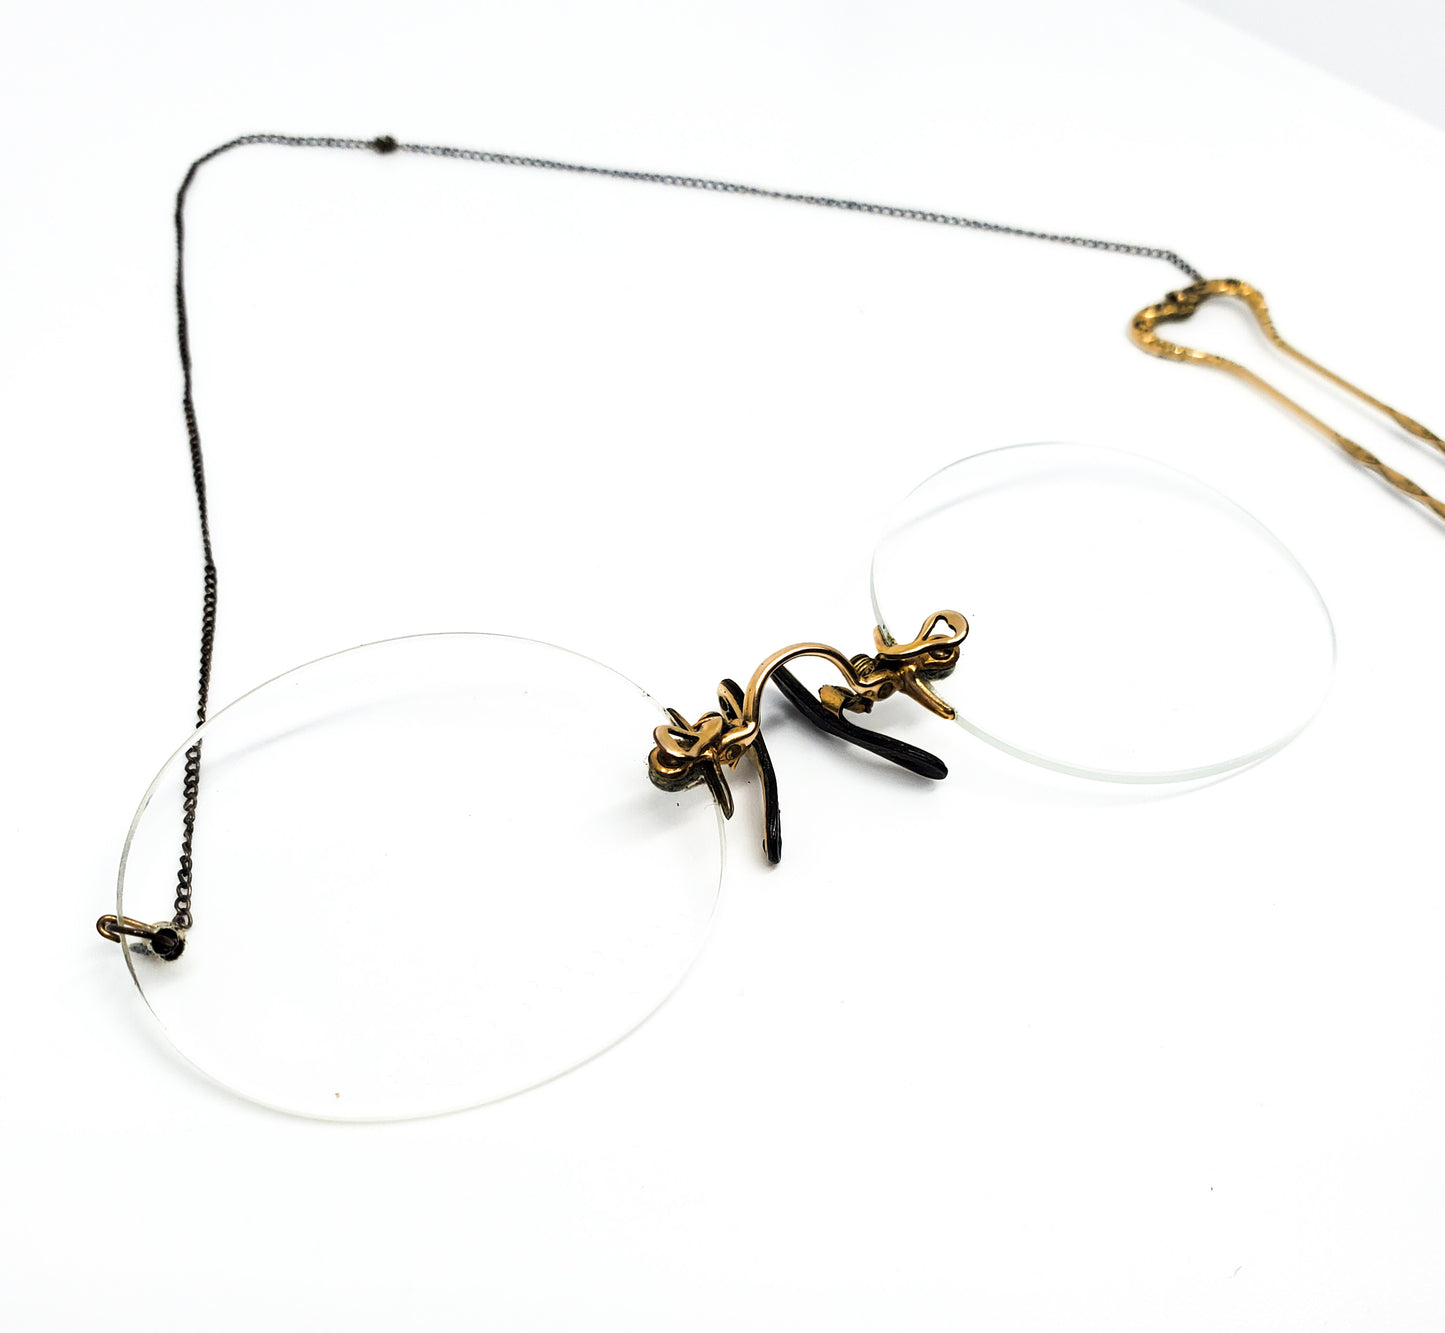 Pince Nez Victorian 1800's glasses 18kt gold filled with hair pick and metal case